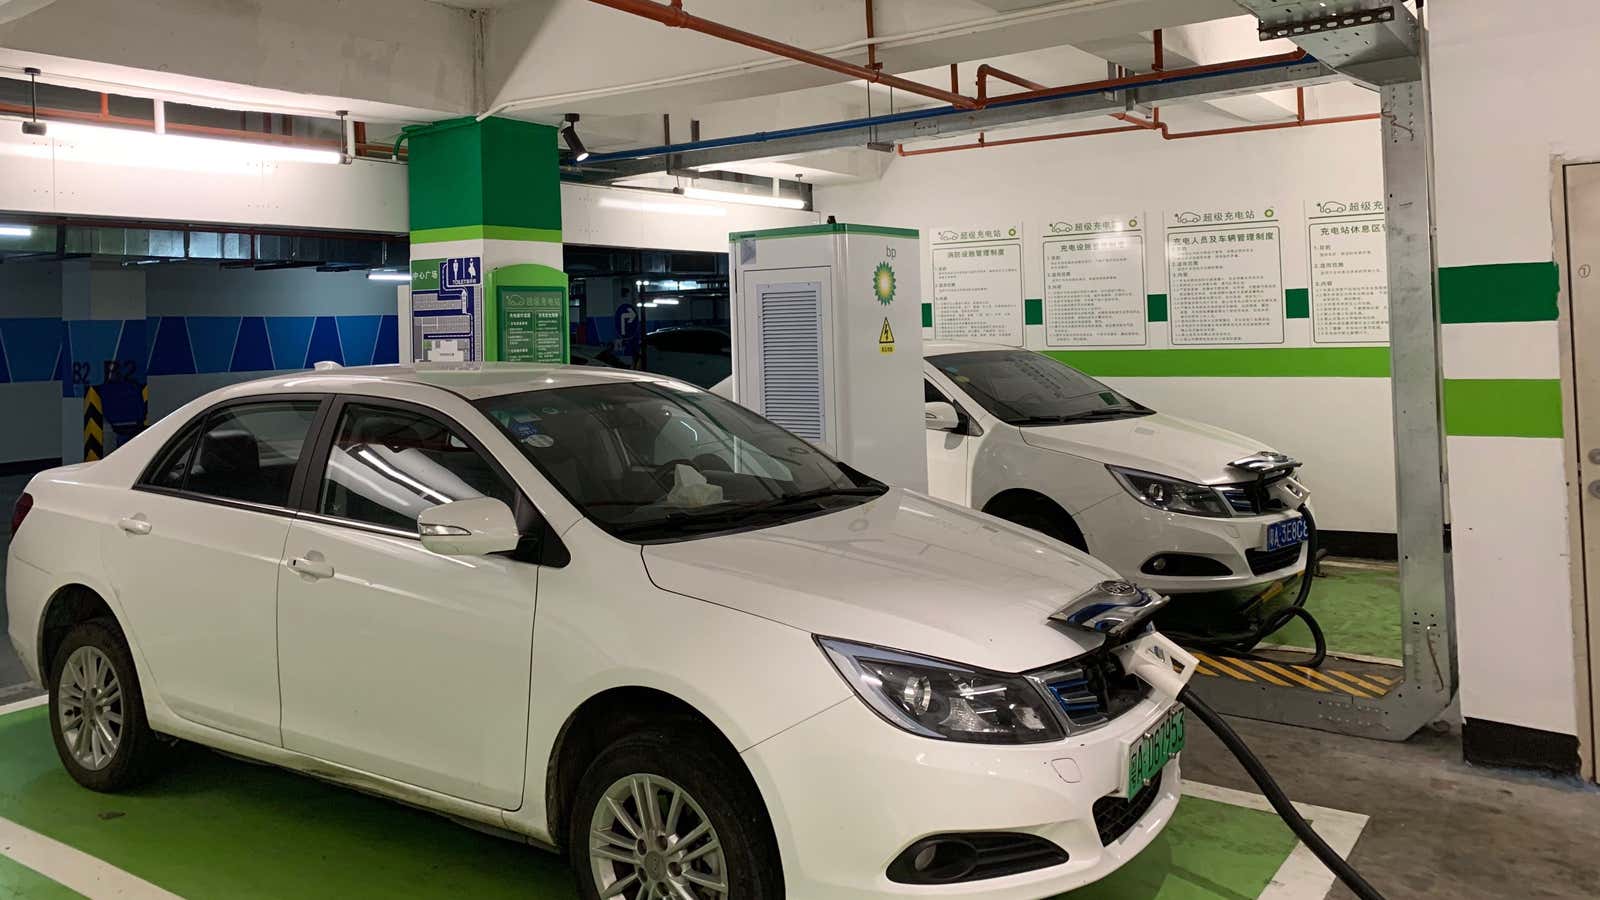 The BP fast charging station in Guangzhou, China.